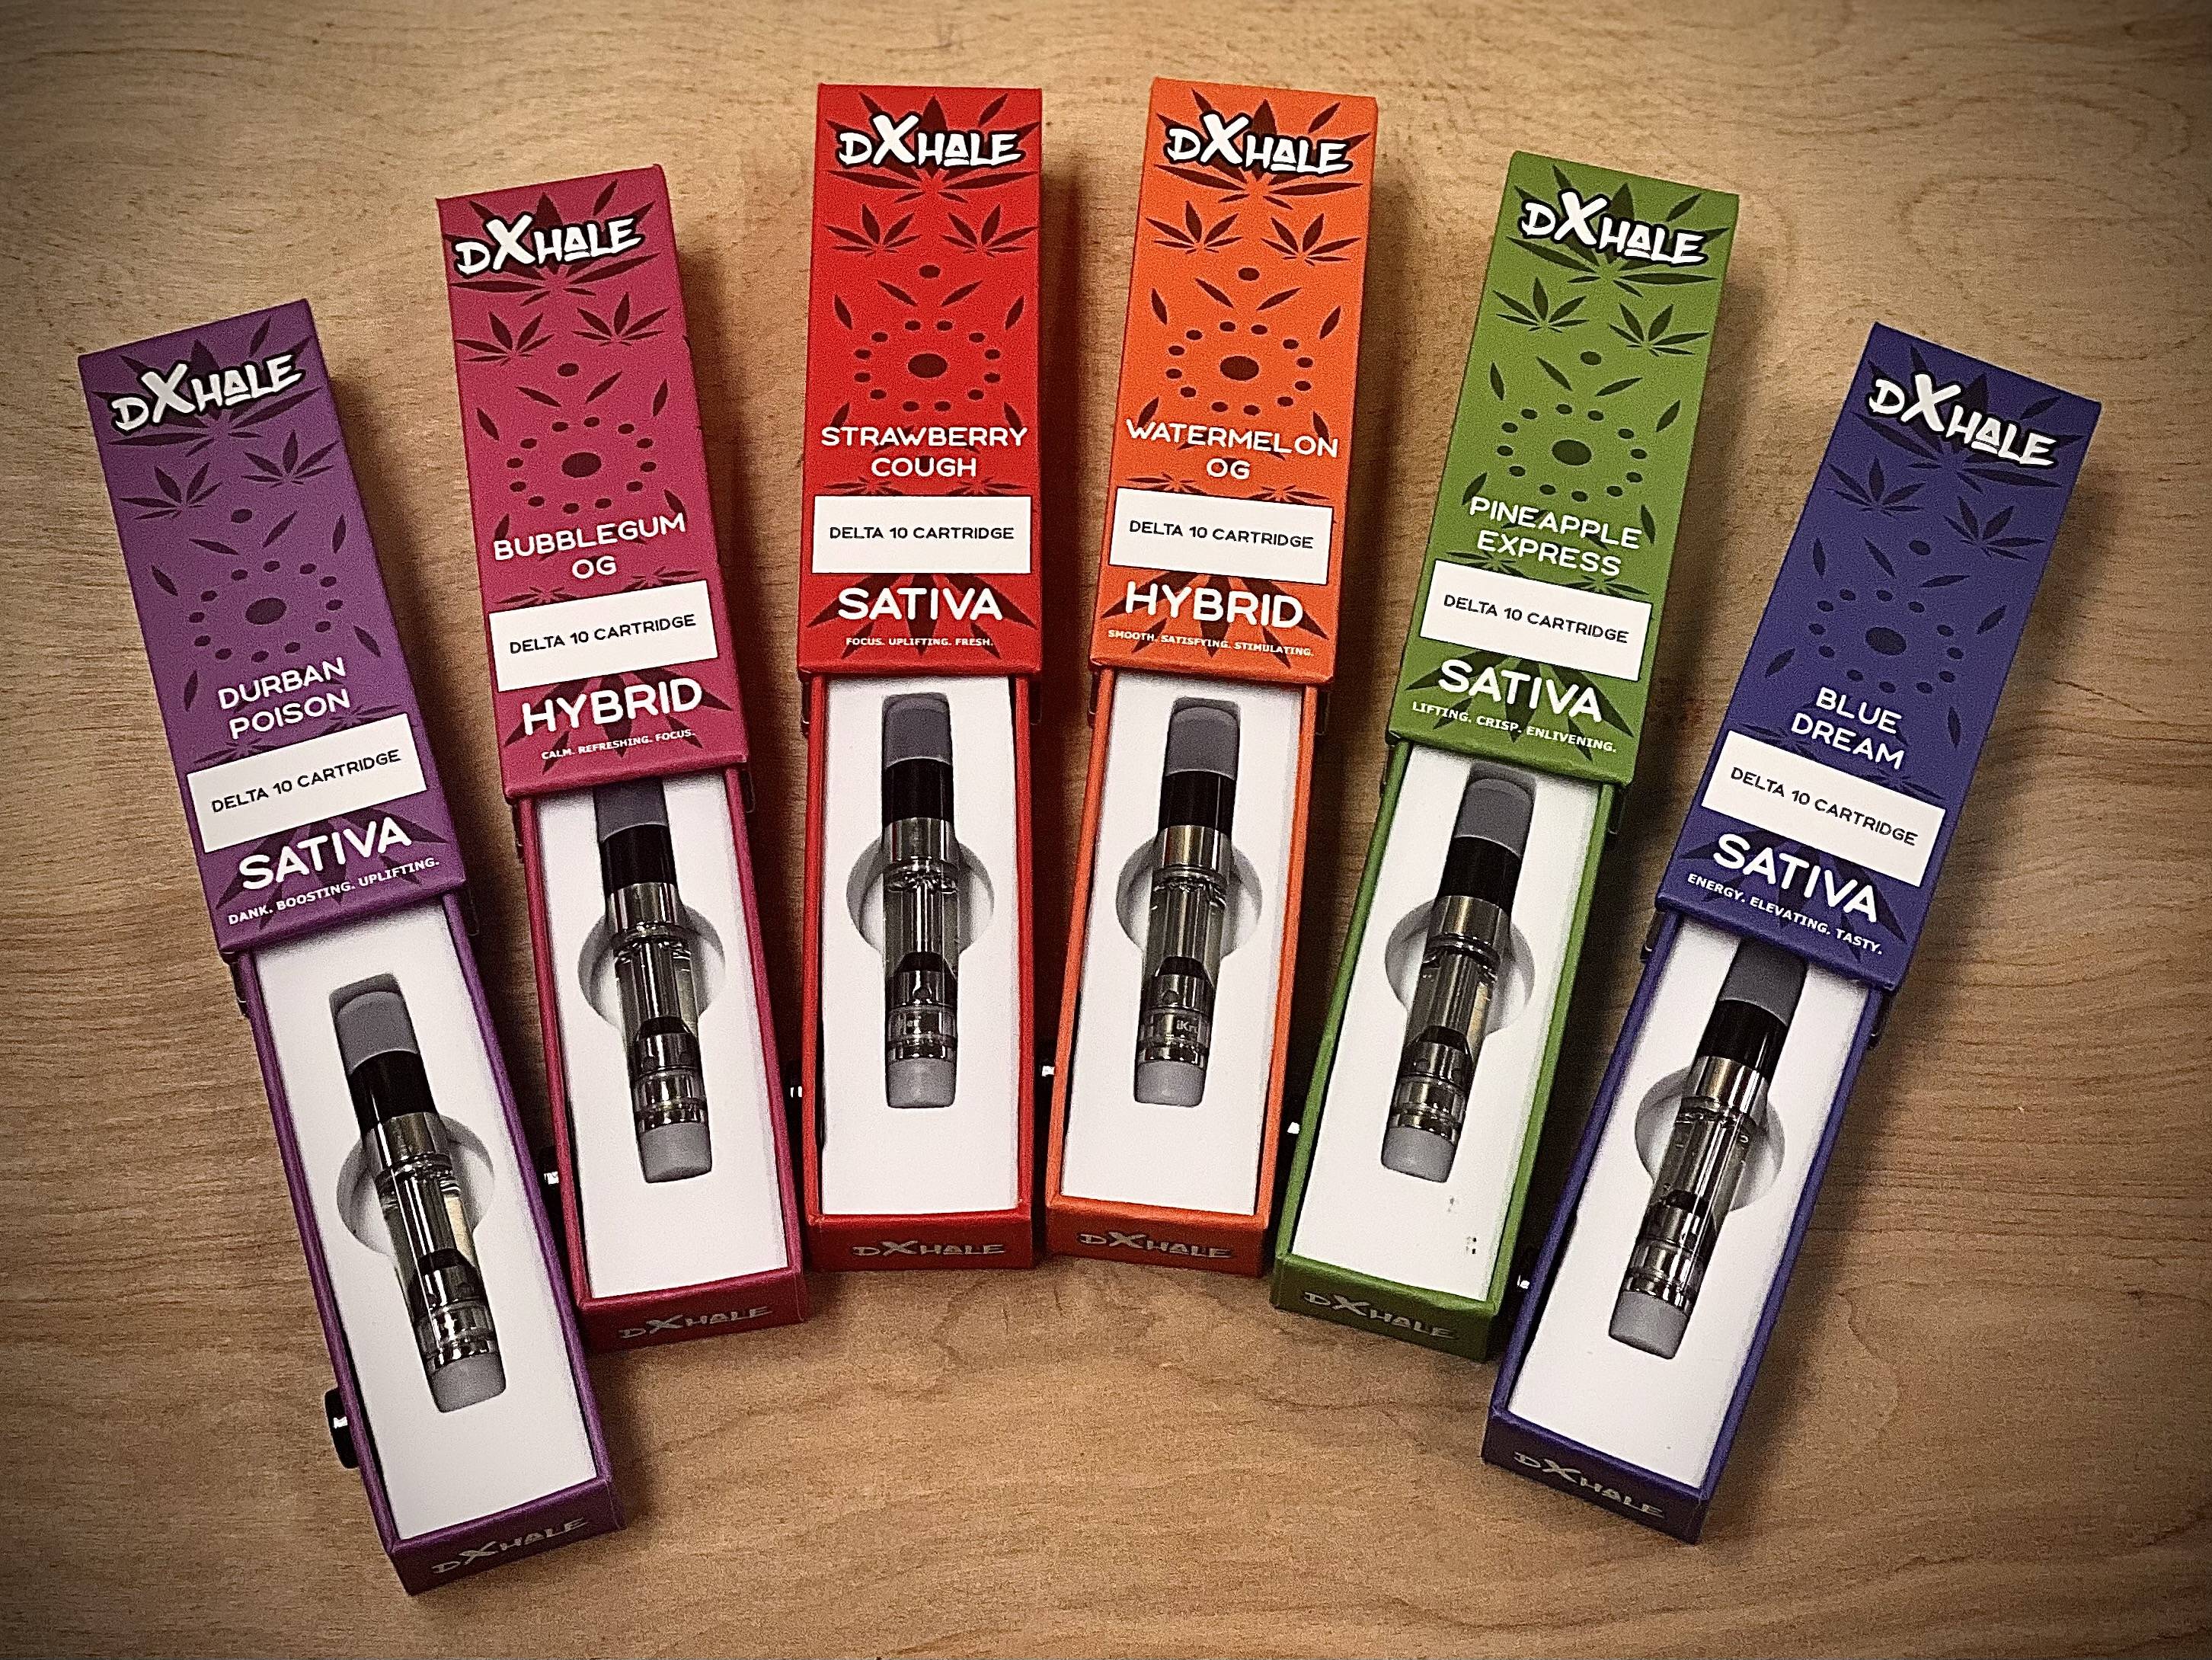 Selection of DXHALE's available Delta 10 Carts in various flavors